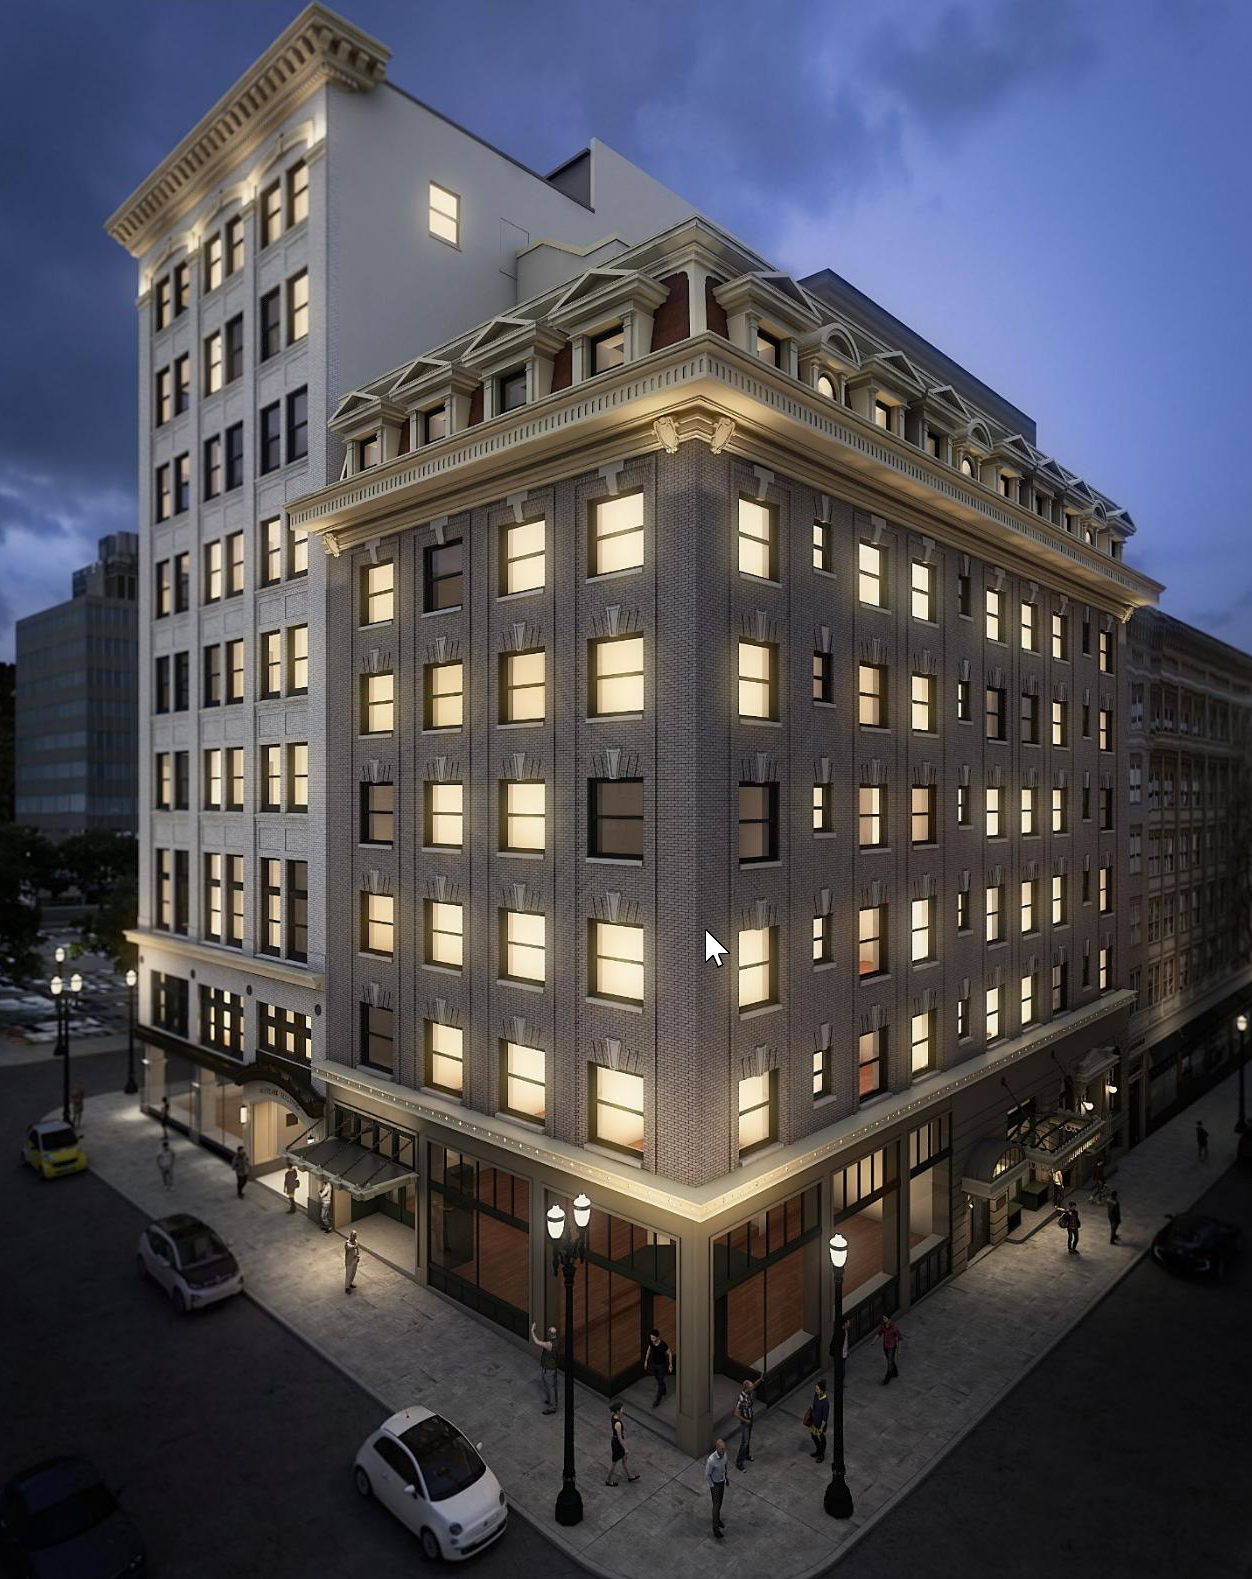 Locally-based Provenance Hotels and NPB Capital purchased two historic Portland buildings to be merged into one hotel